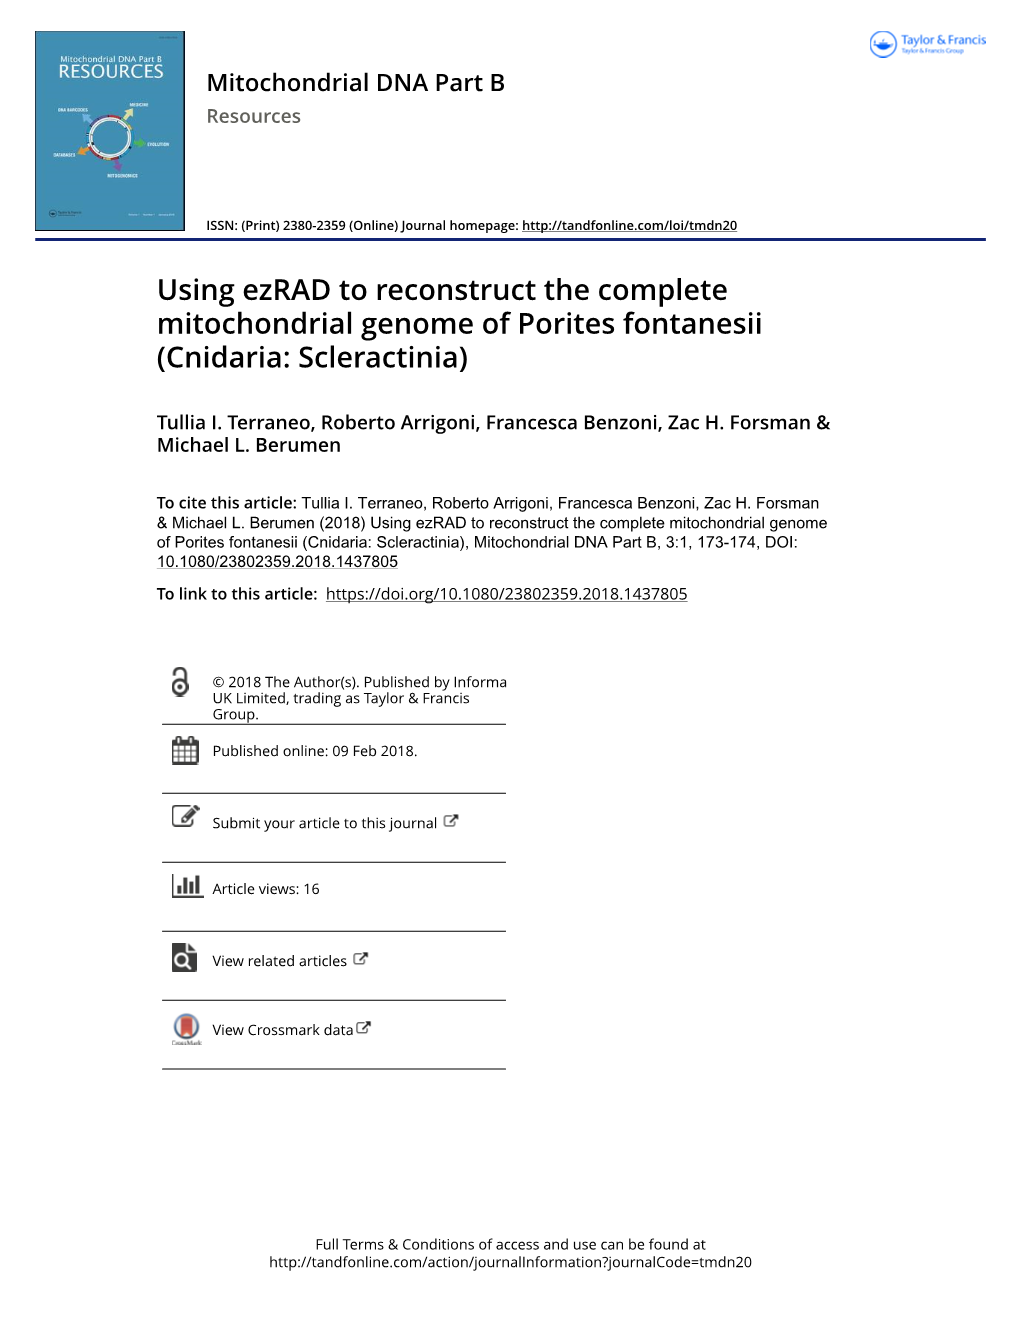 Using Ezrad to Reconstruct the Complete Mitochondrial Genome of Porites Fontanesii (Cnidaria: Scleractinia)